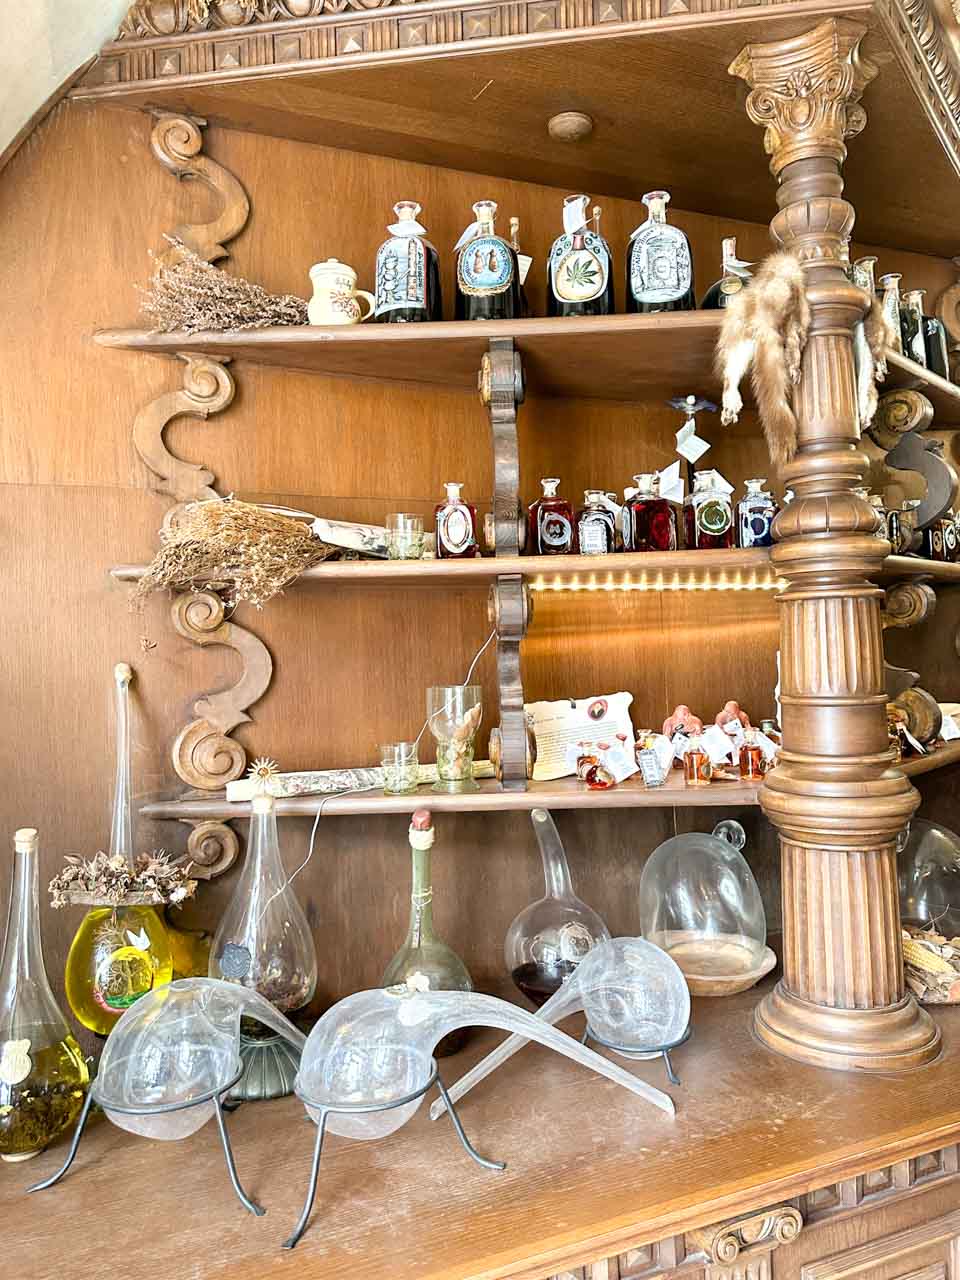 Small bottles and potion brewing equipment on display at Speculum Alchemiae in Prague